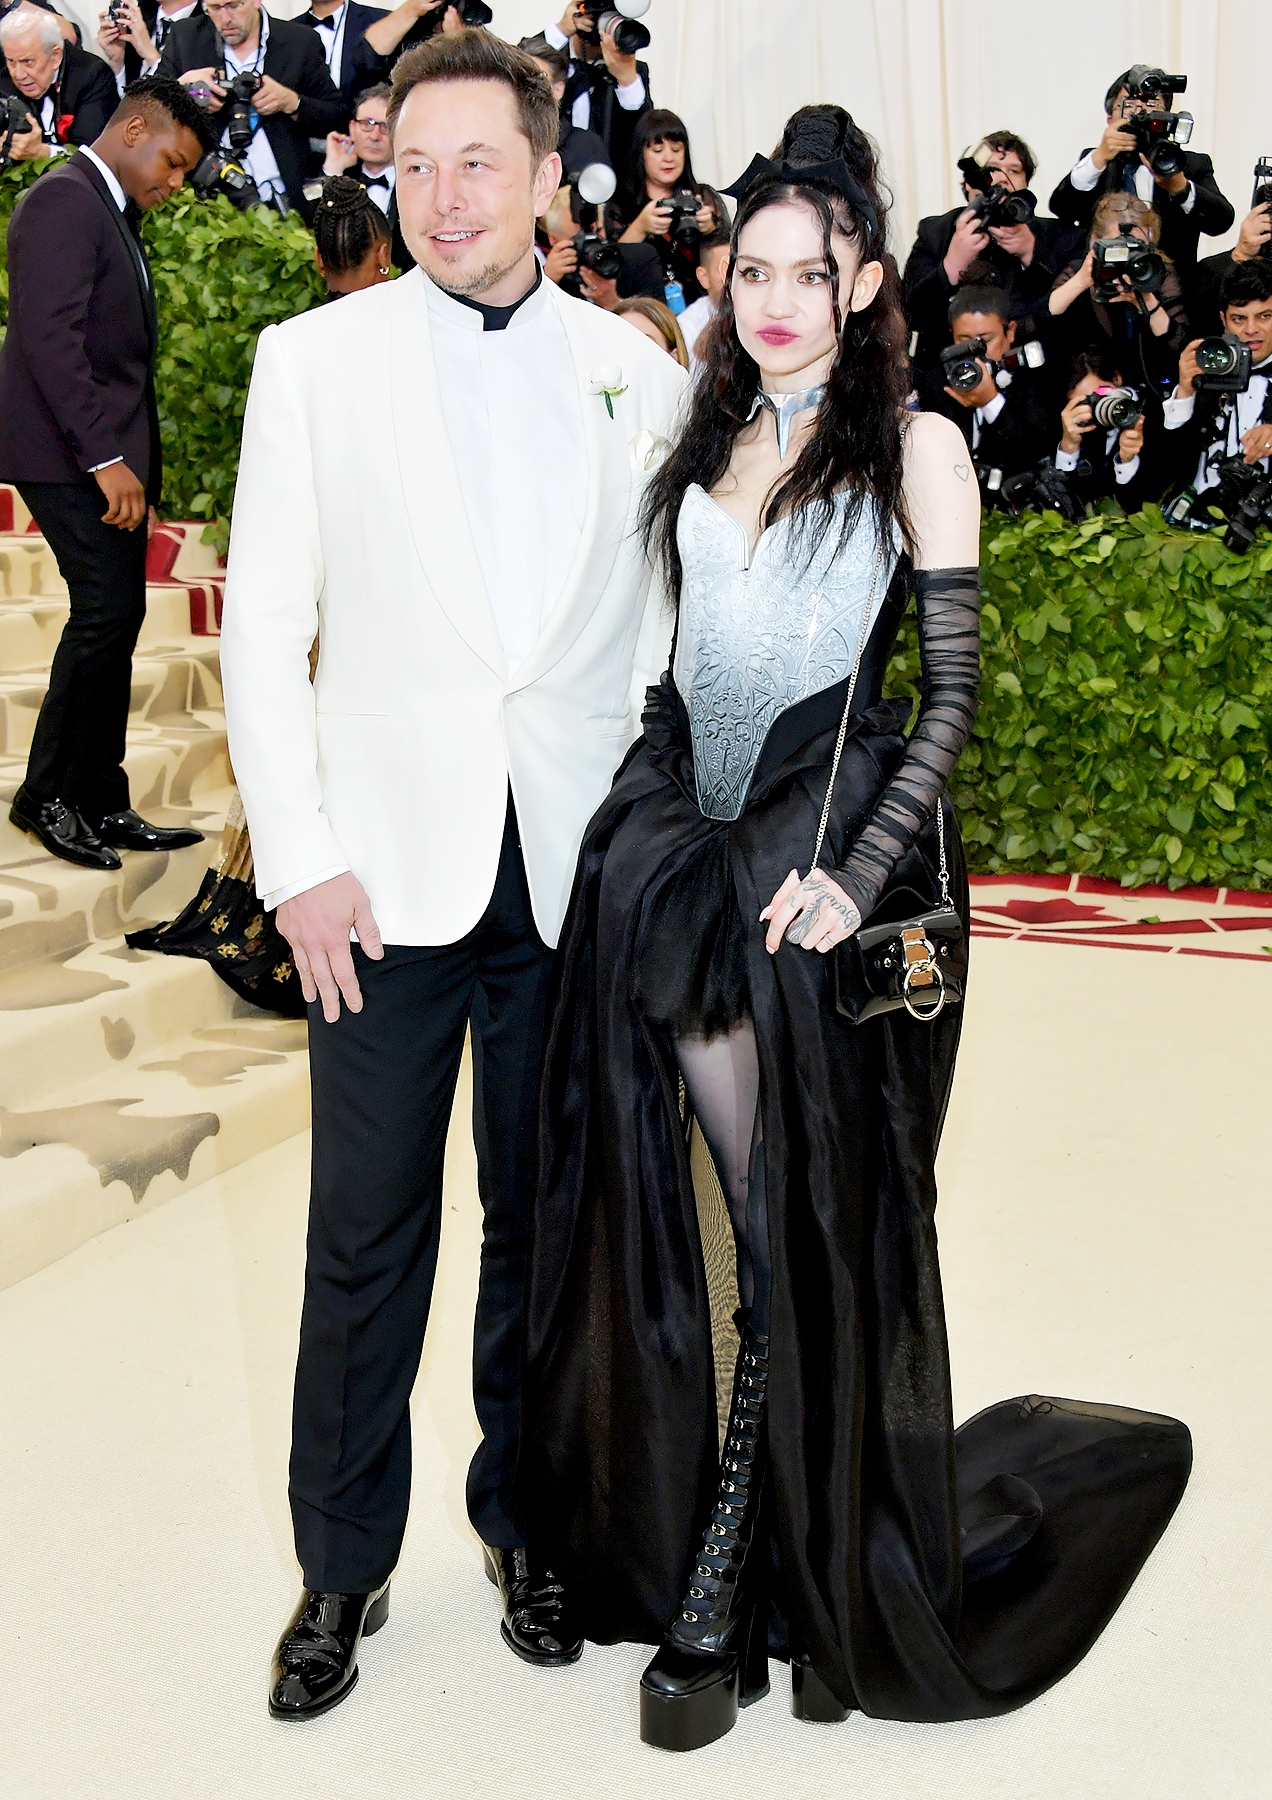 Elon Musk Steps Out With New Girlfriend Grimes at Met Gala 2018 | Hot